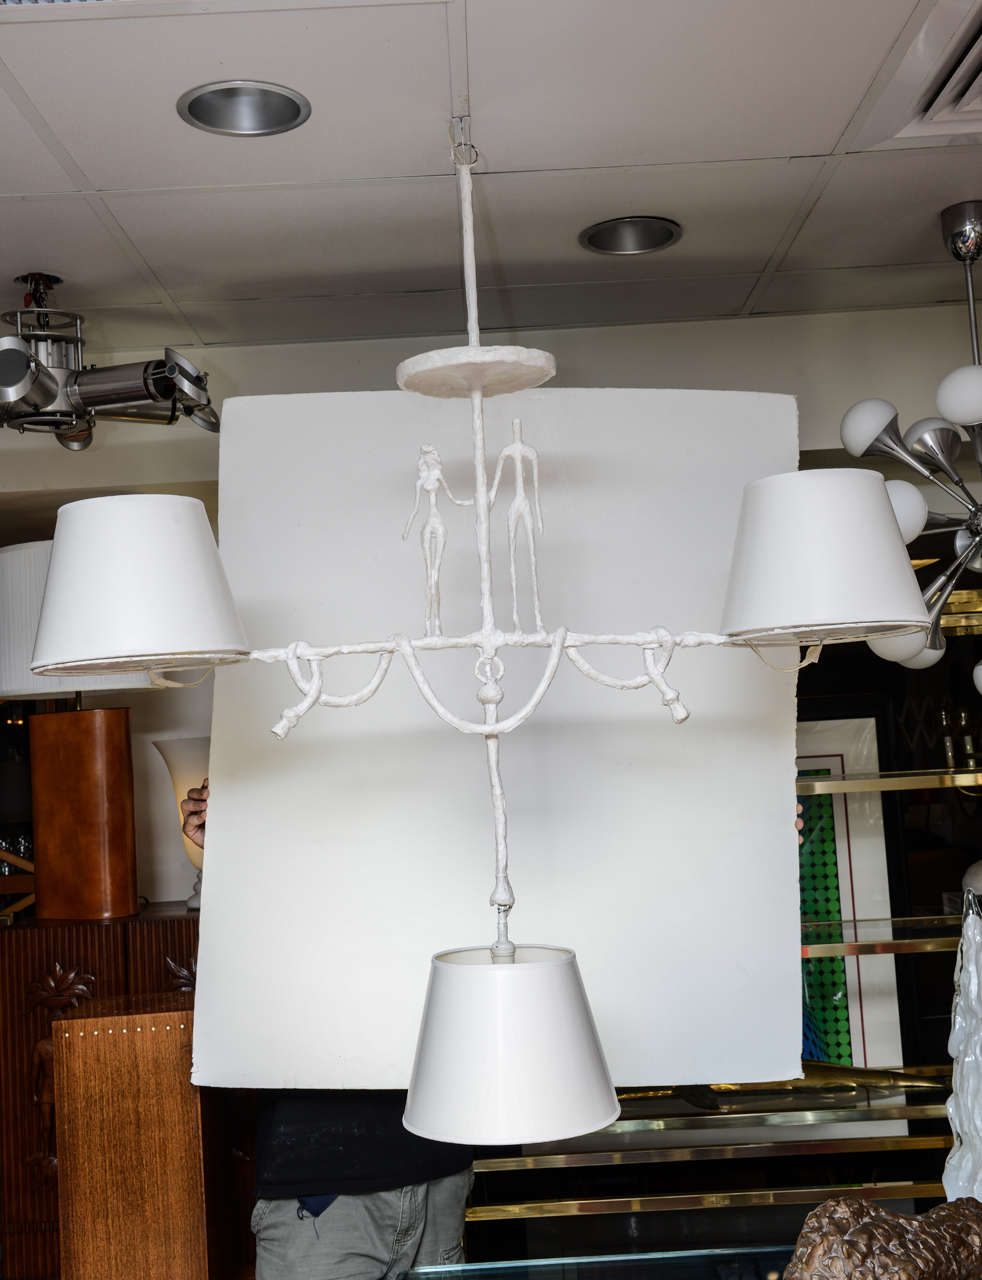 3 lights on this plaster clad chandelier with figural theme.
Wonderful vintage working condition and new shades.